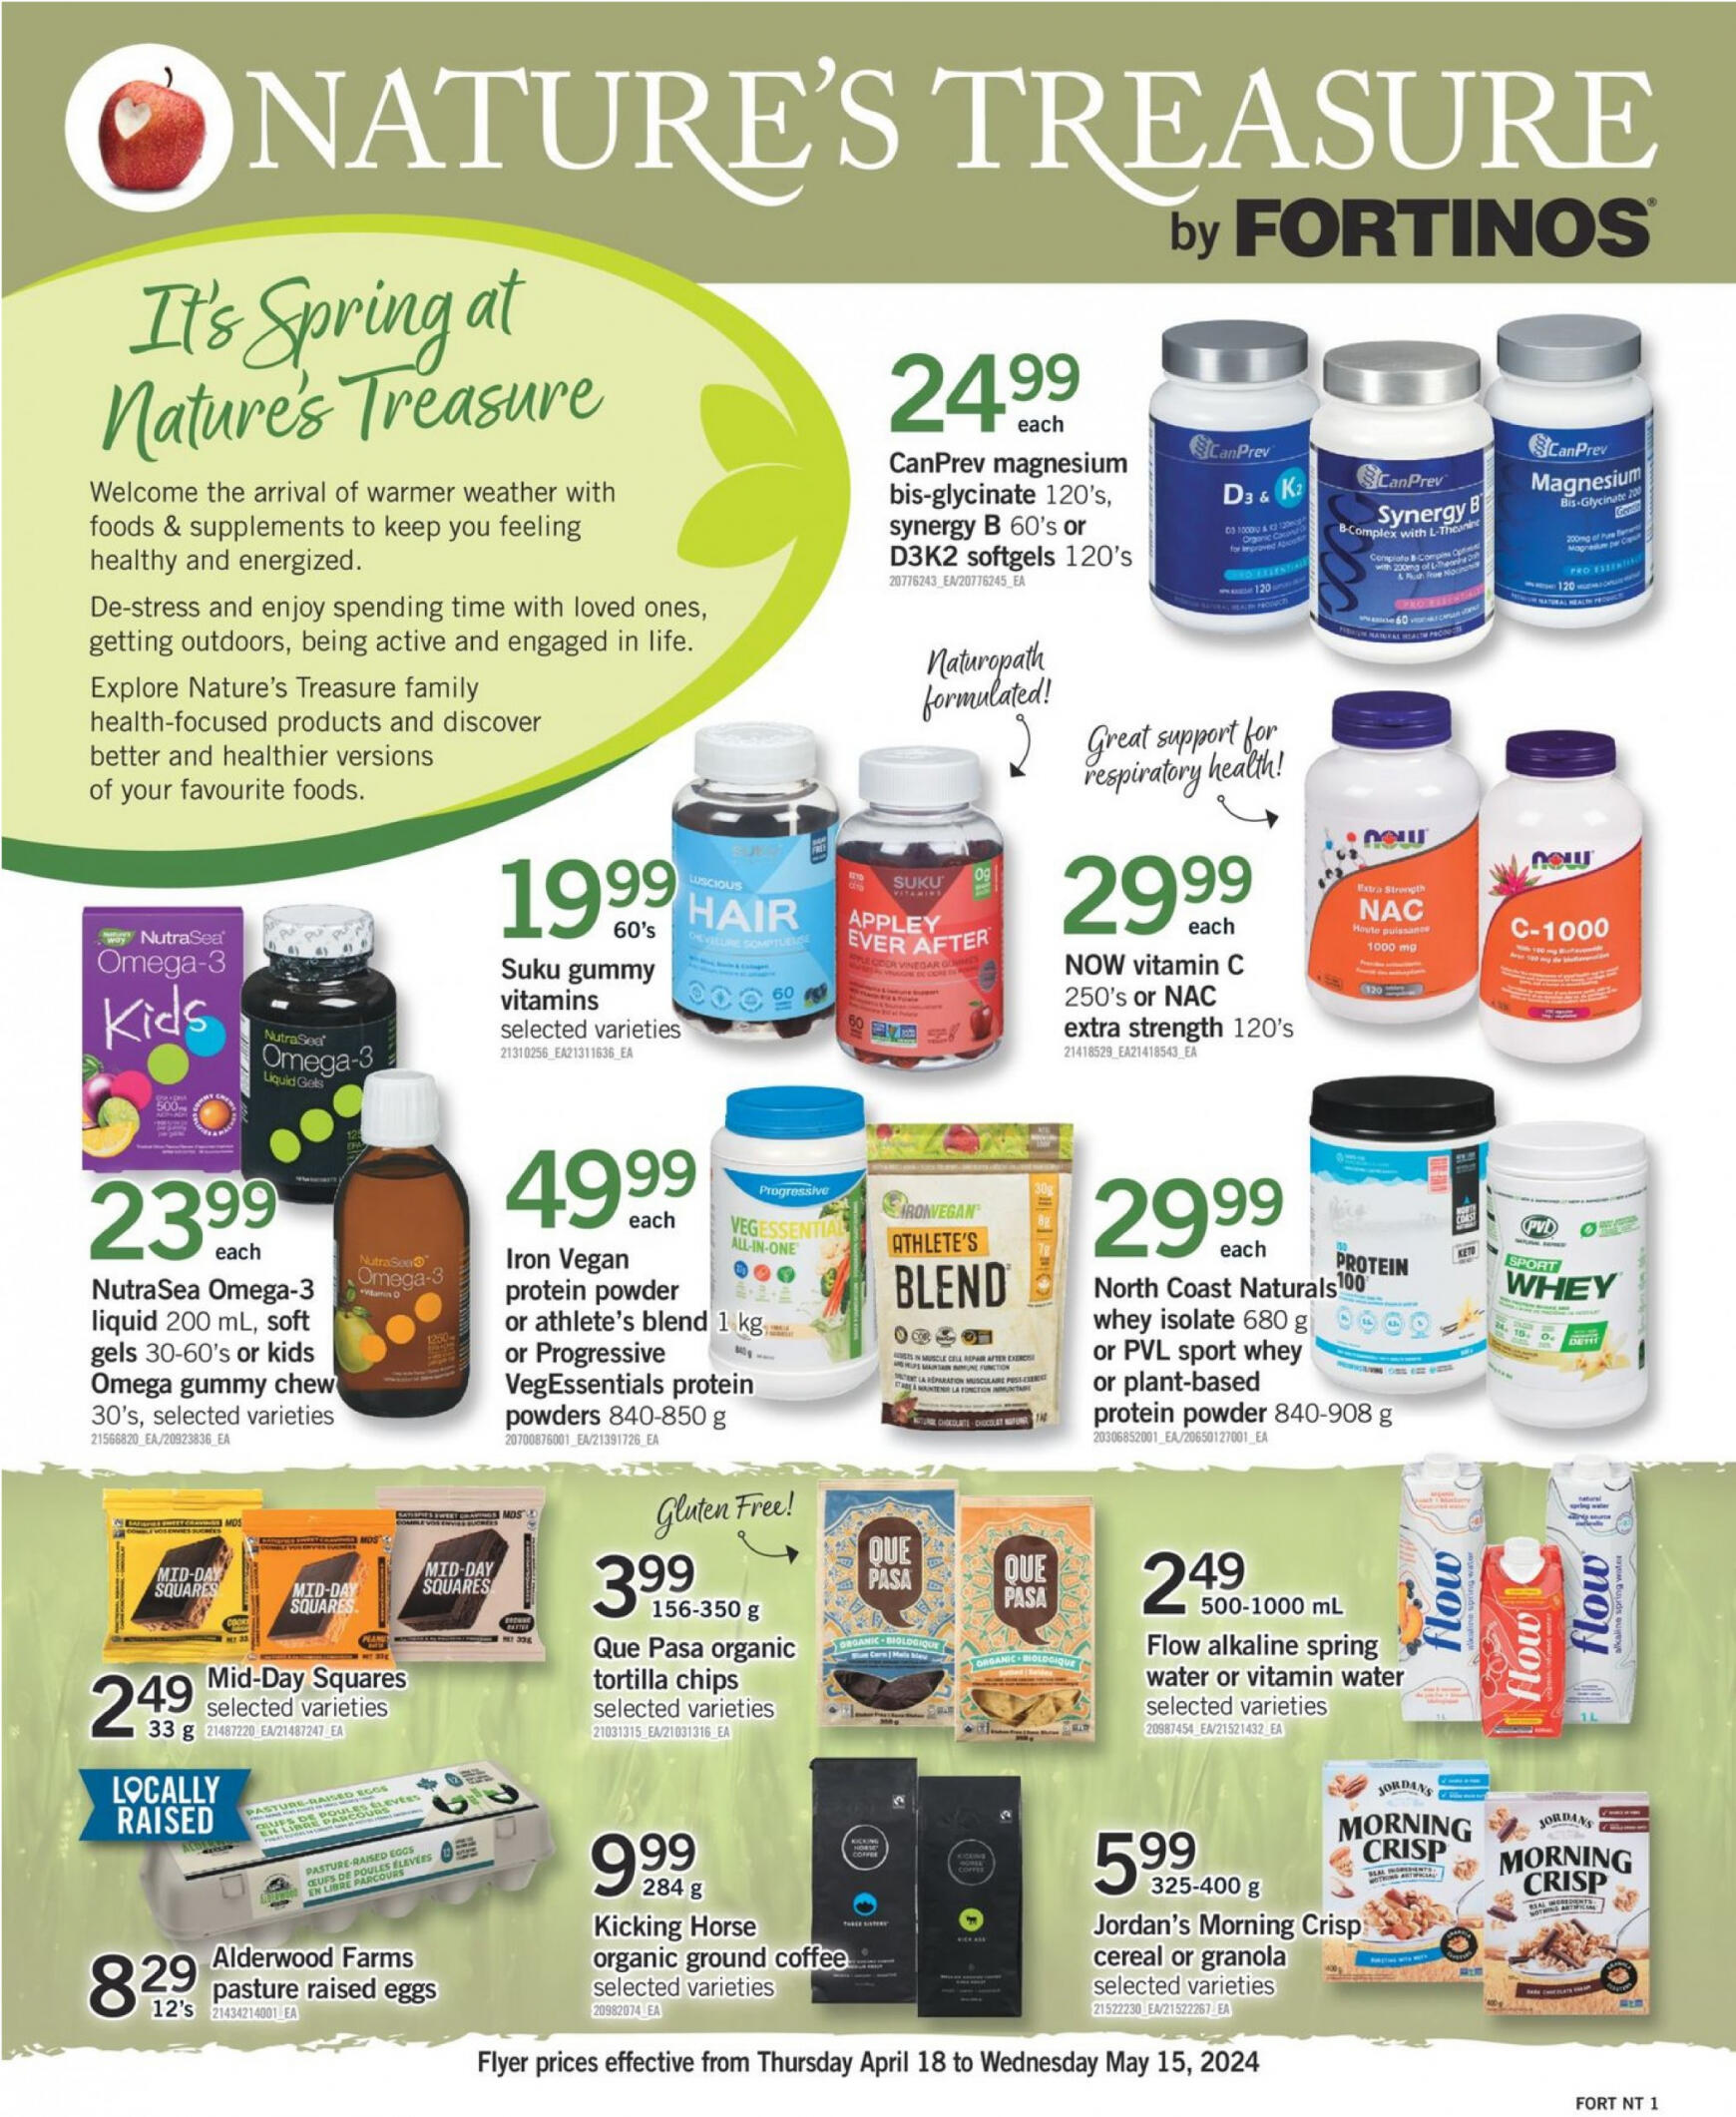 fortinos - Fortinos flyer current 02.05. - 08.05. - page: 10